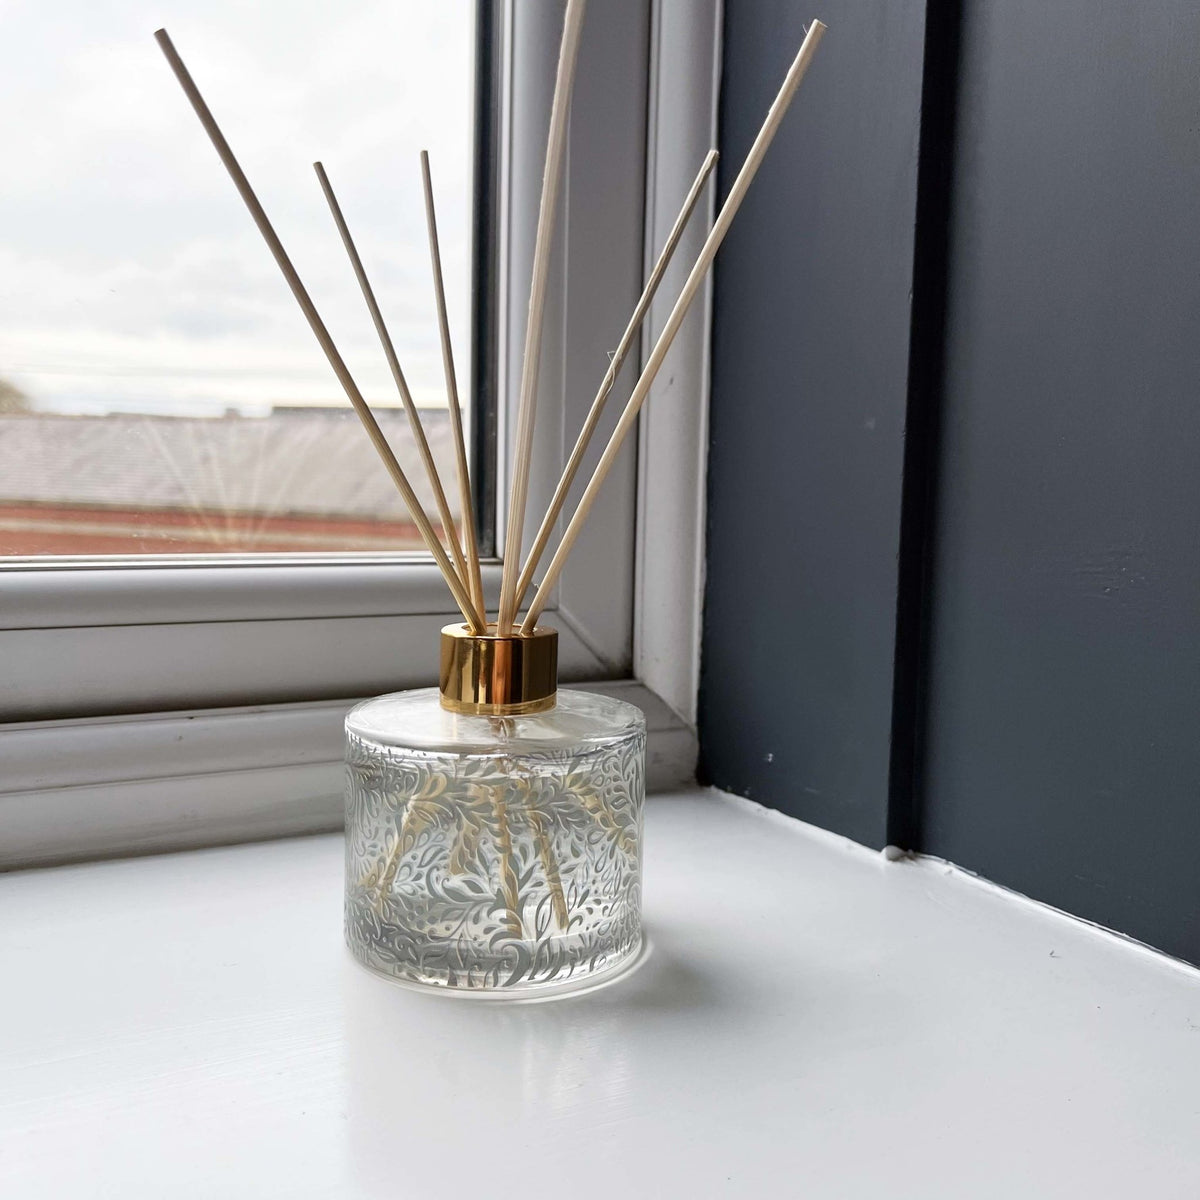 Pear and Fig Scent Reed Scent Diffuser